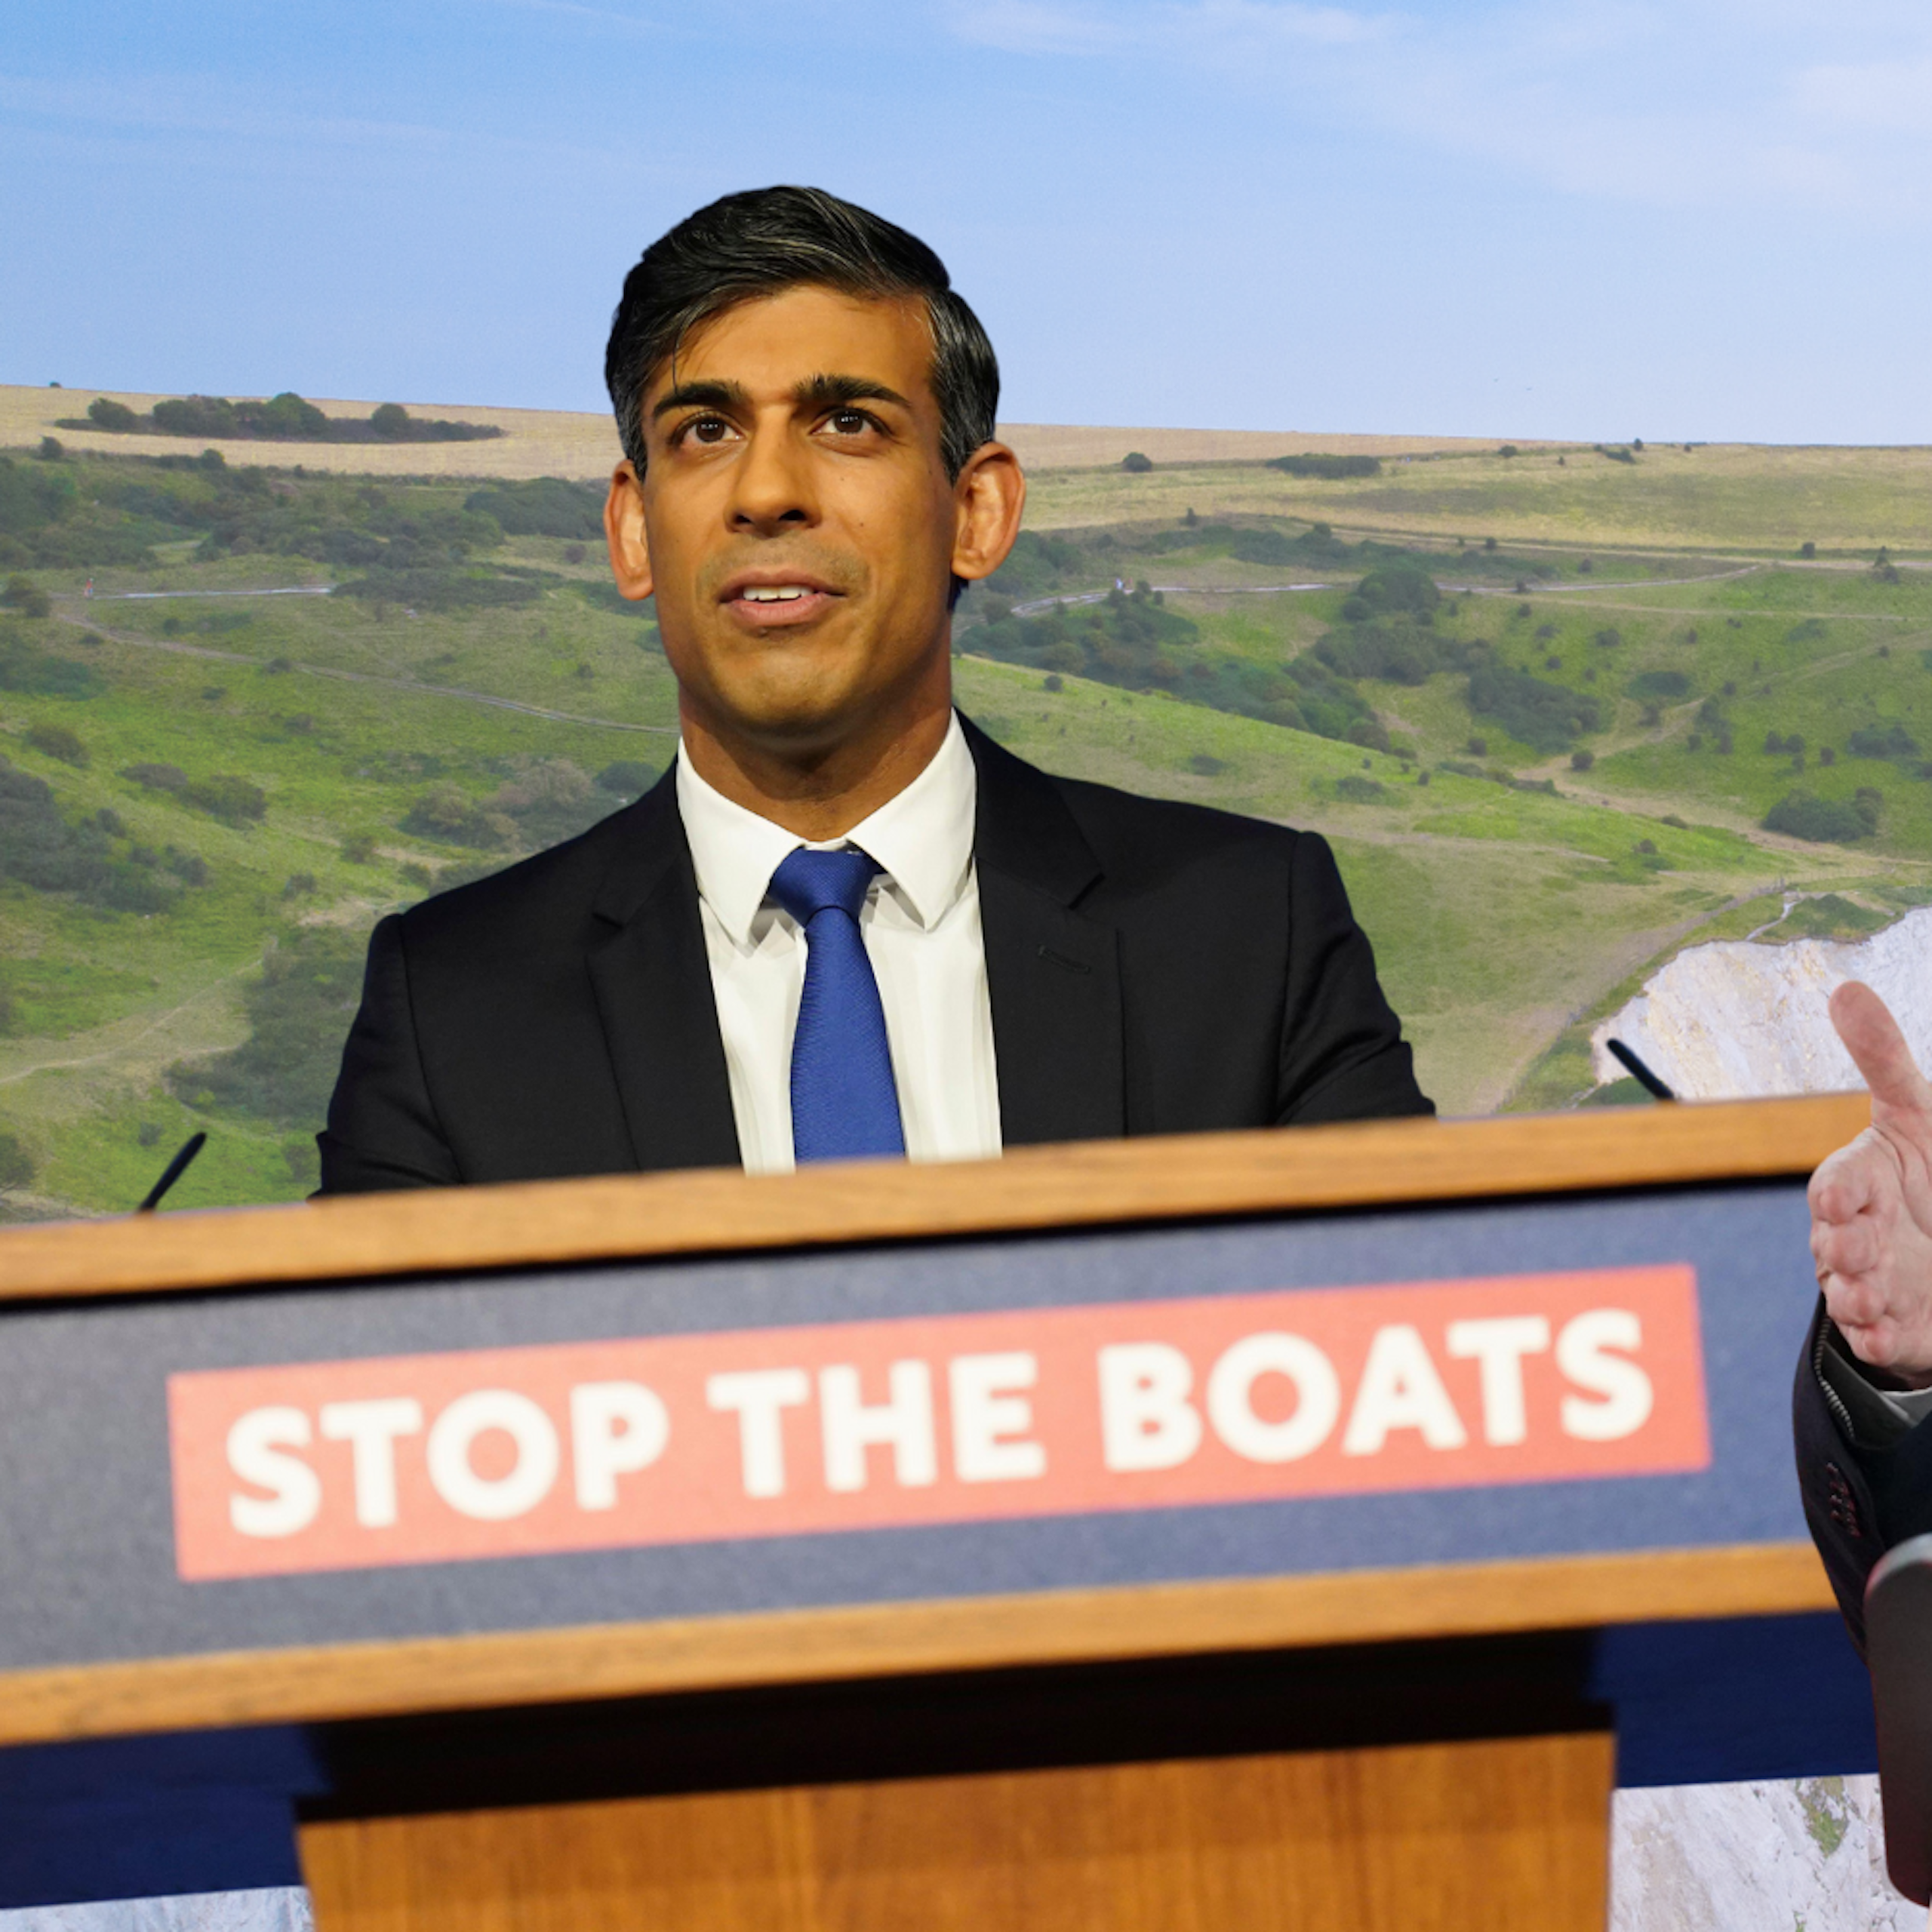 Photo collage of rishi sunak and keir starmer with their respective migration slogans in front of the white cliffs of dover